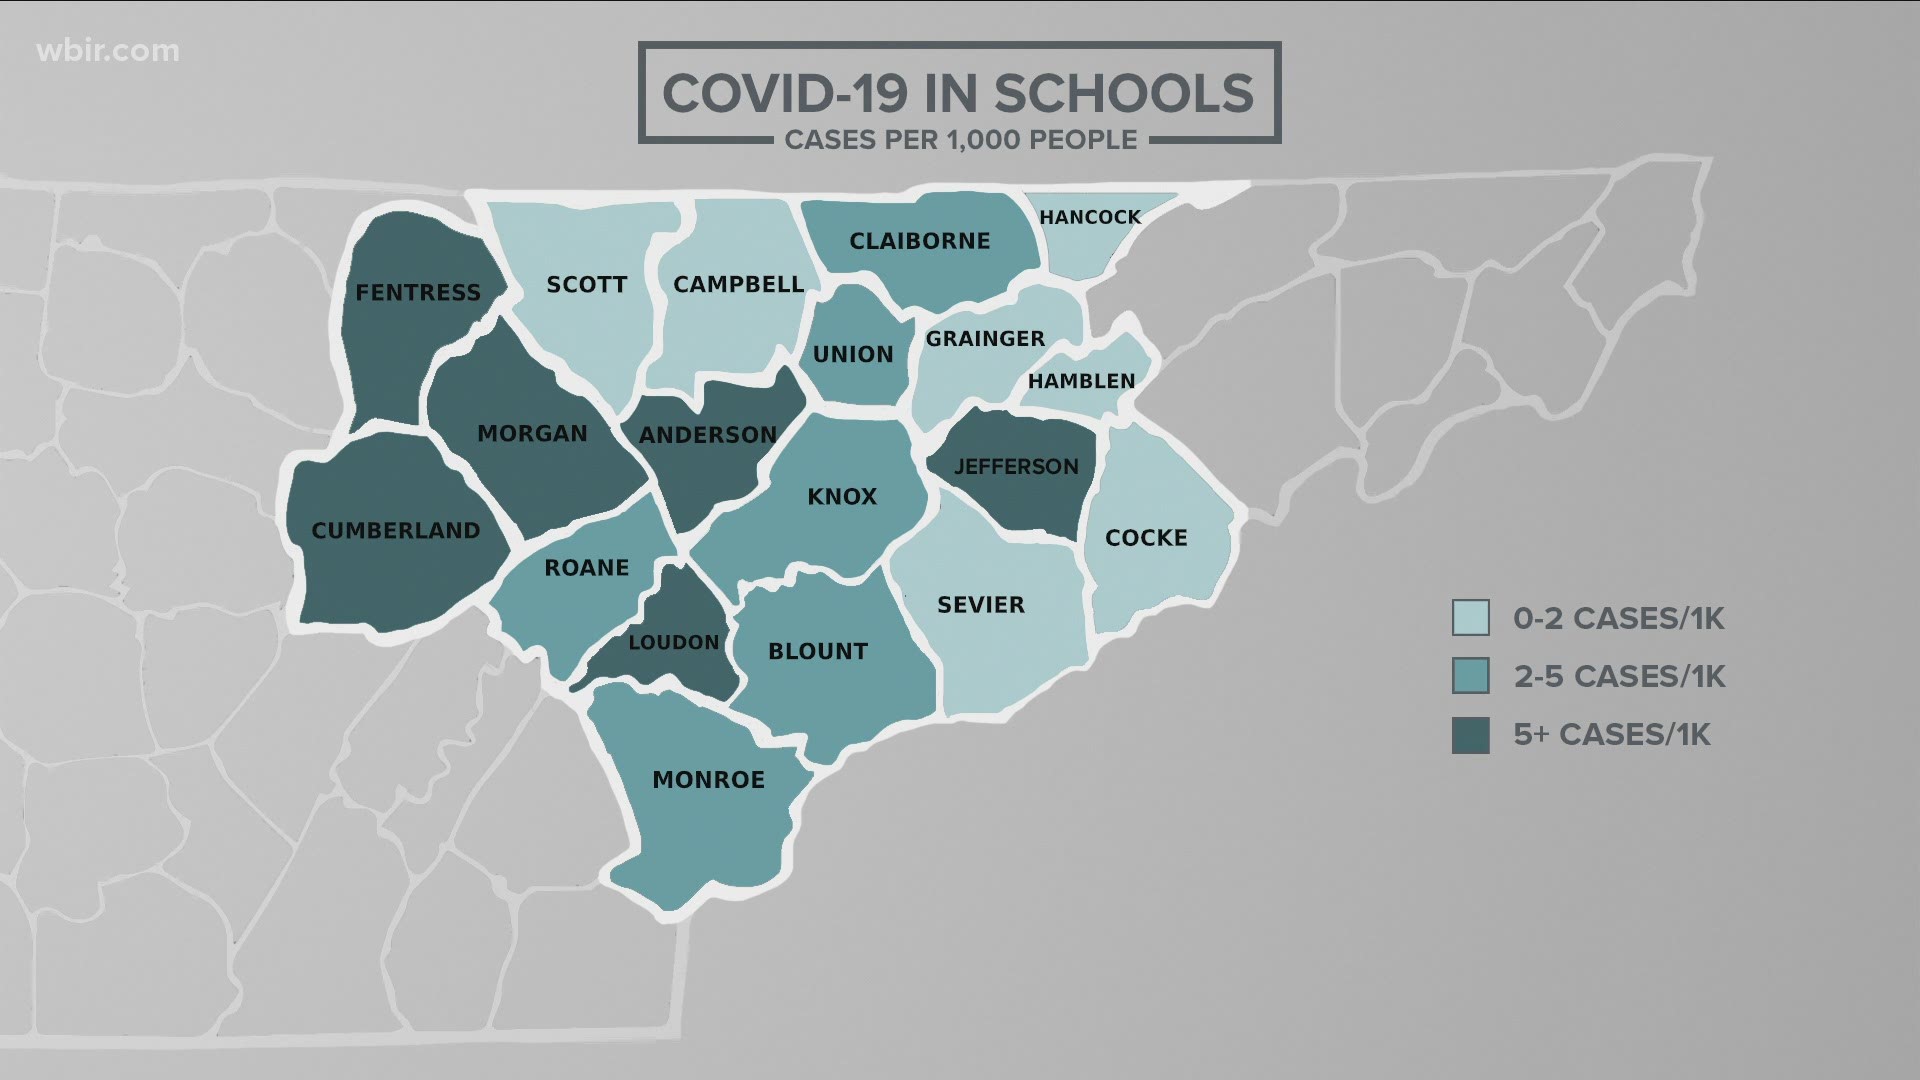 So far more than 650 COVID-19 cases have been reported in East TN school systems.